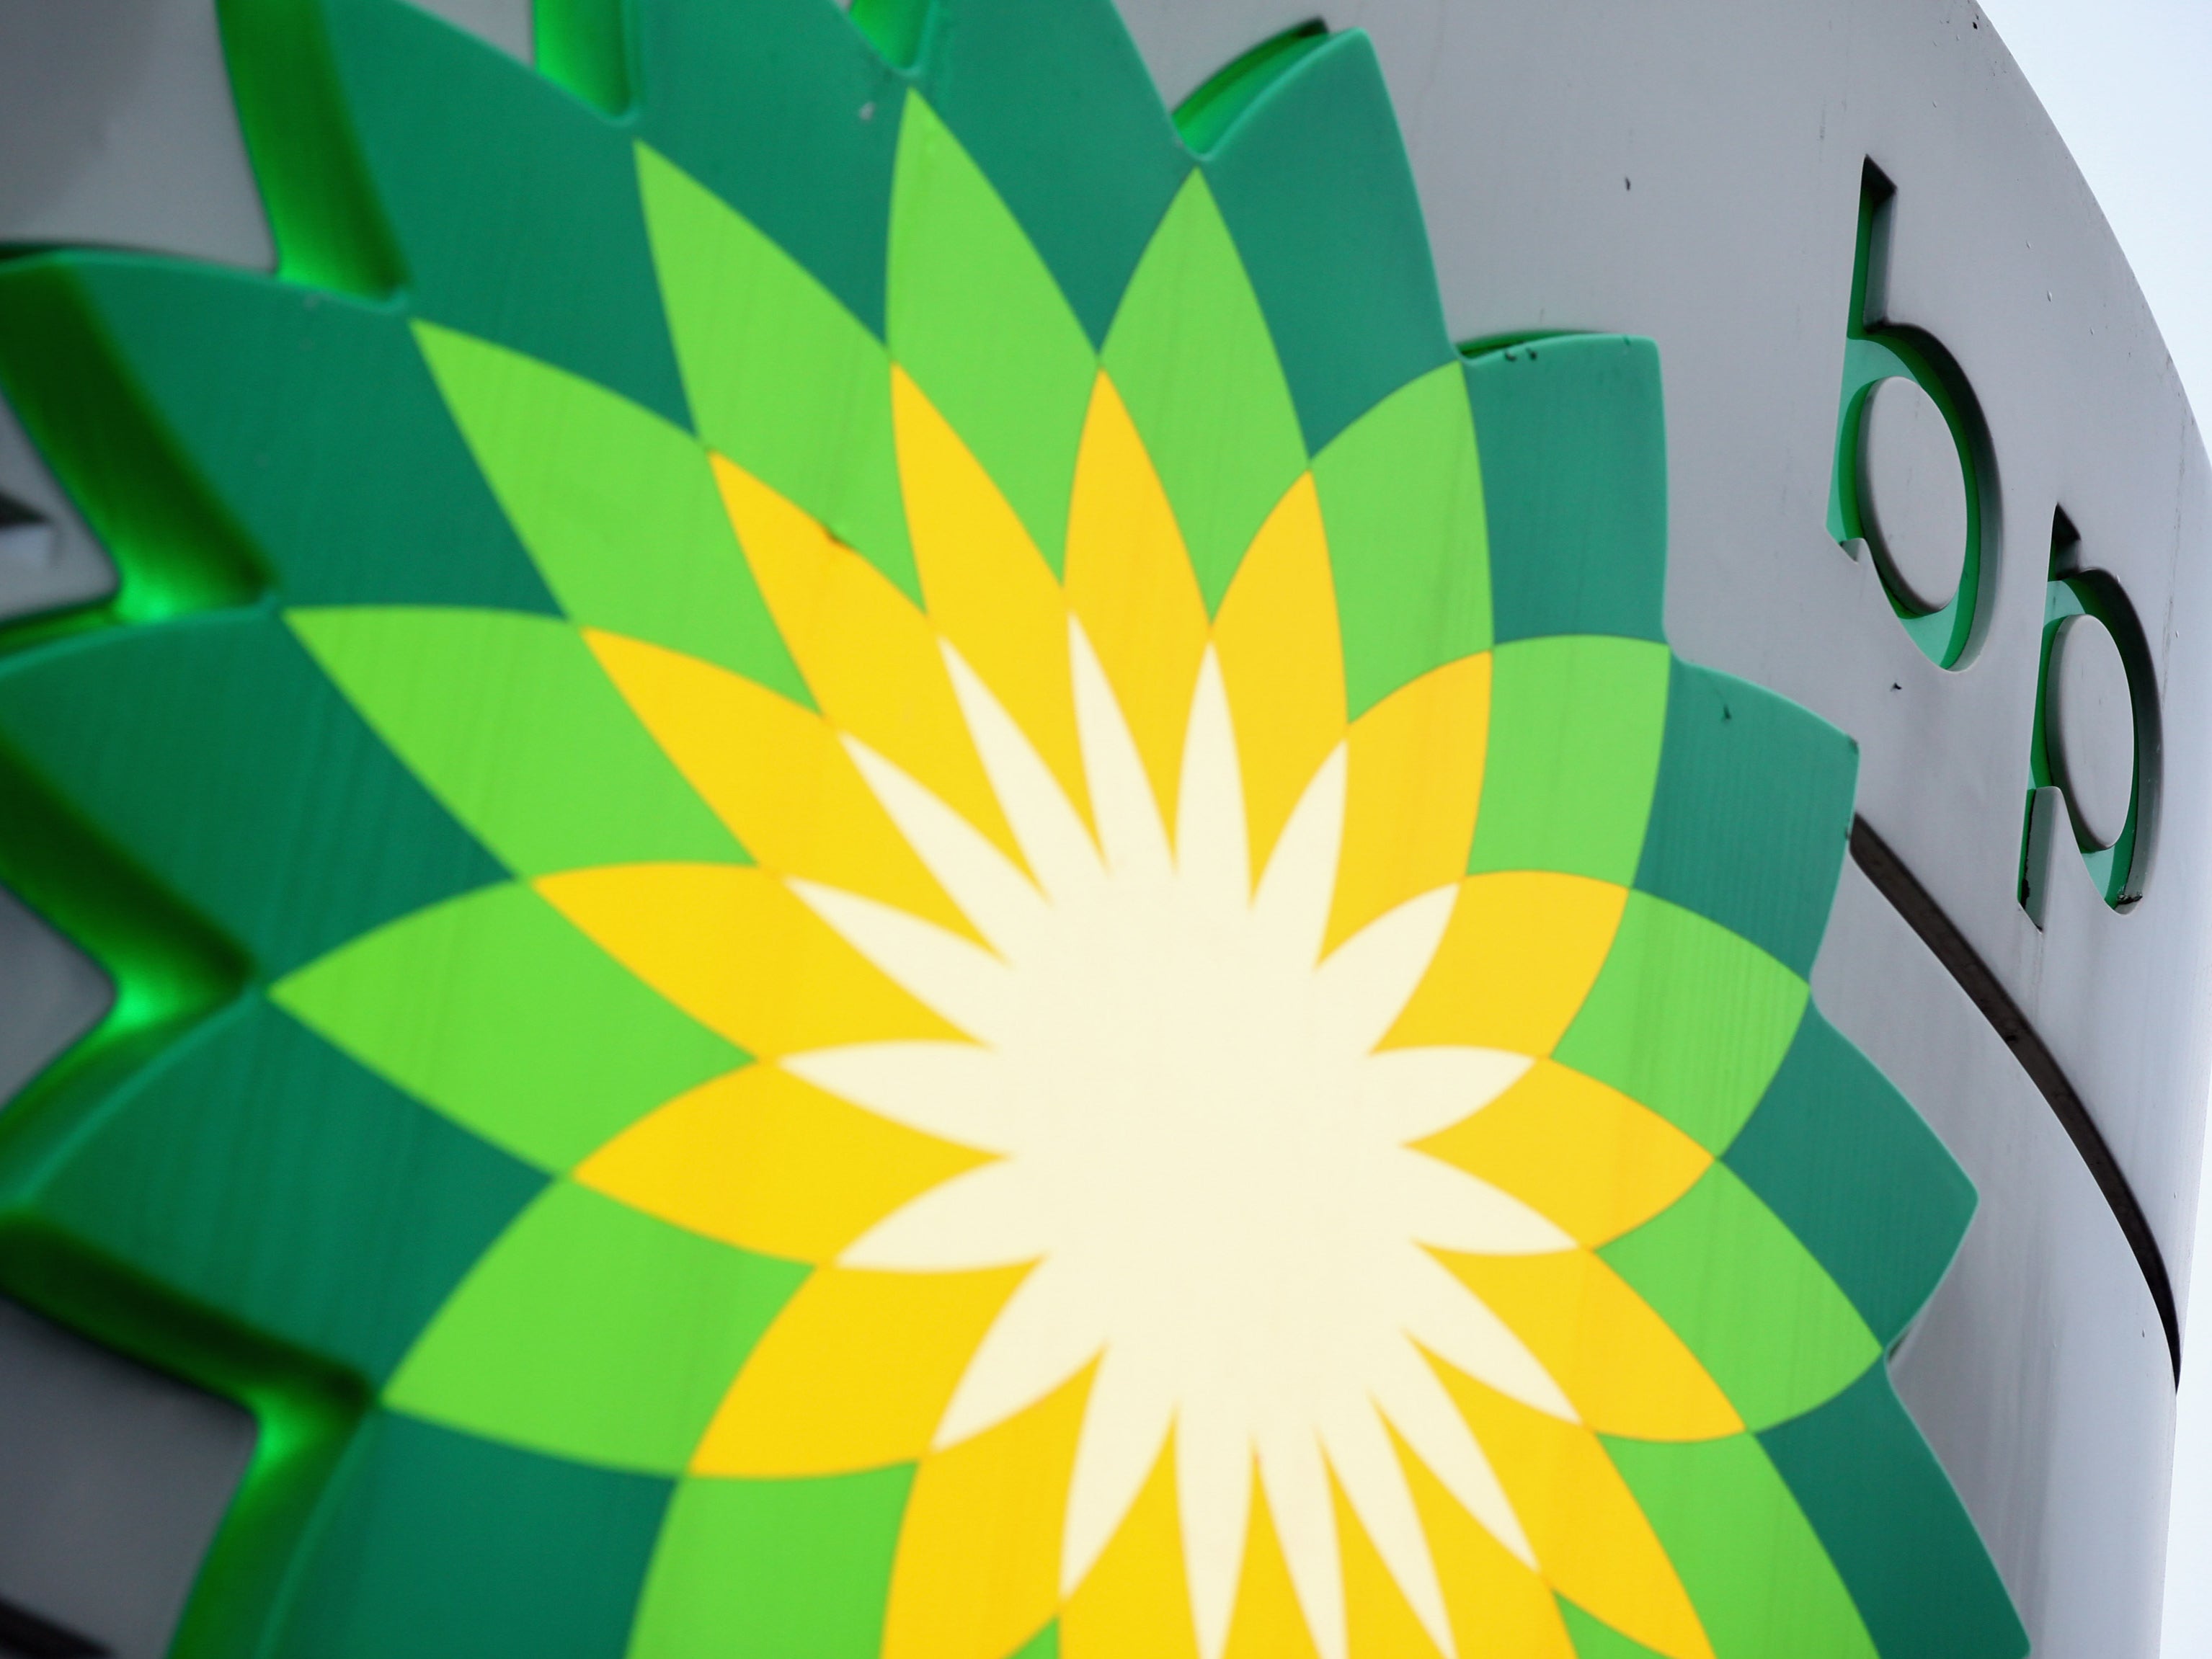 BP’s corporate colours are green but does the company’s behaviour pass the eco-test?